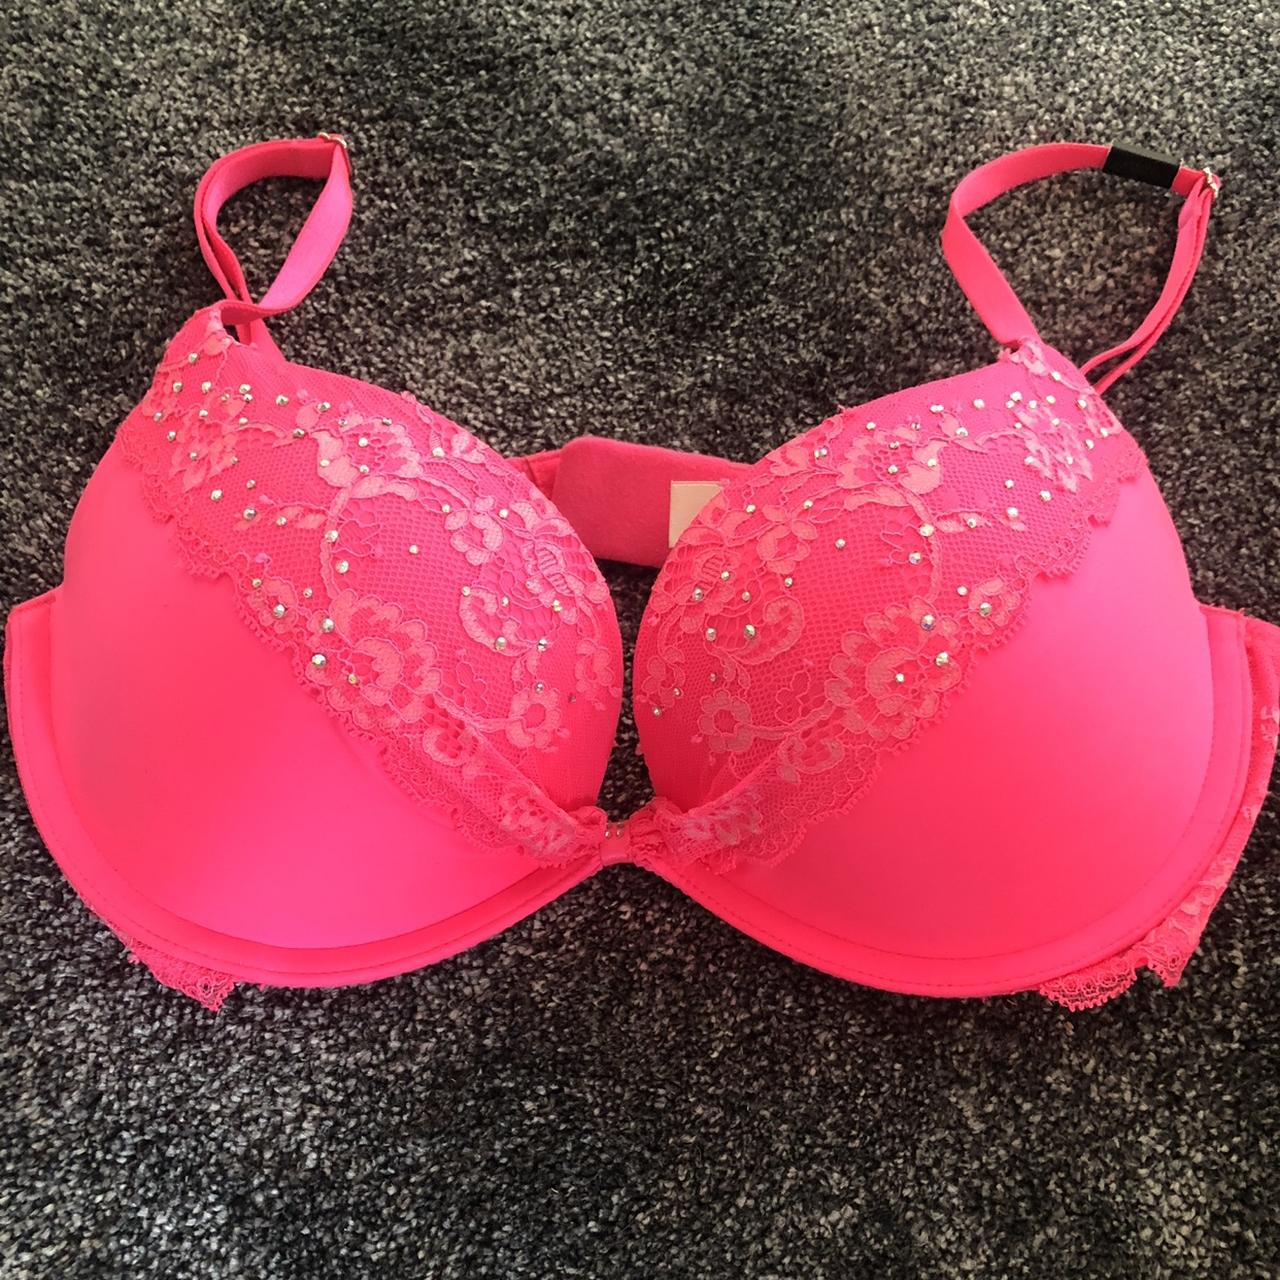 Victoria's Secret Miraculous Plunge - Nude with